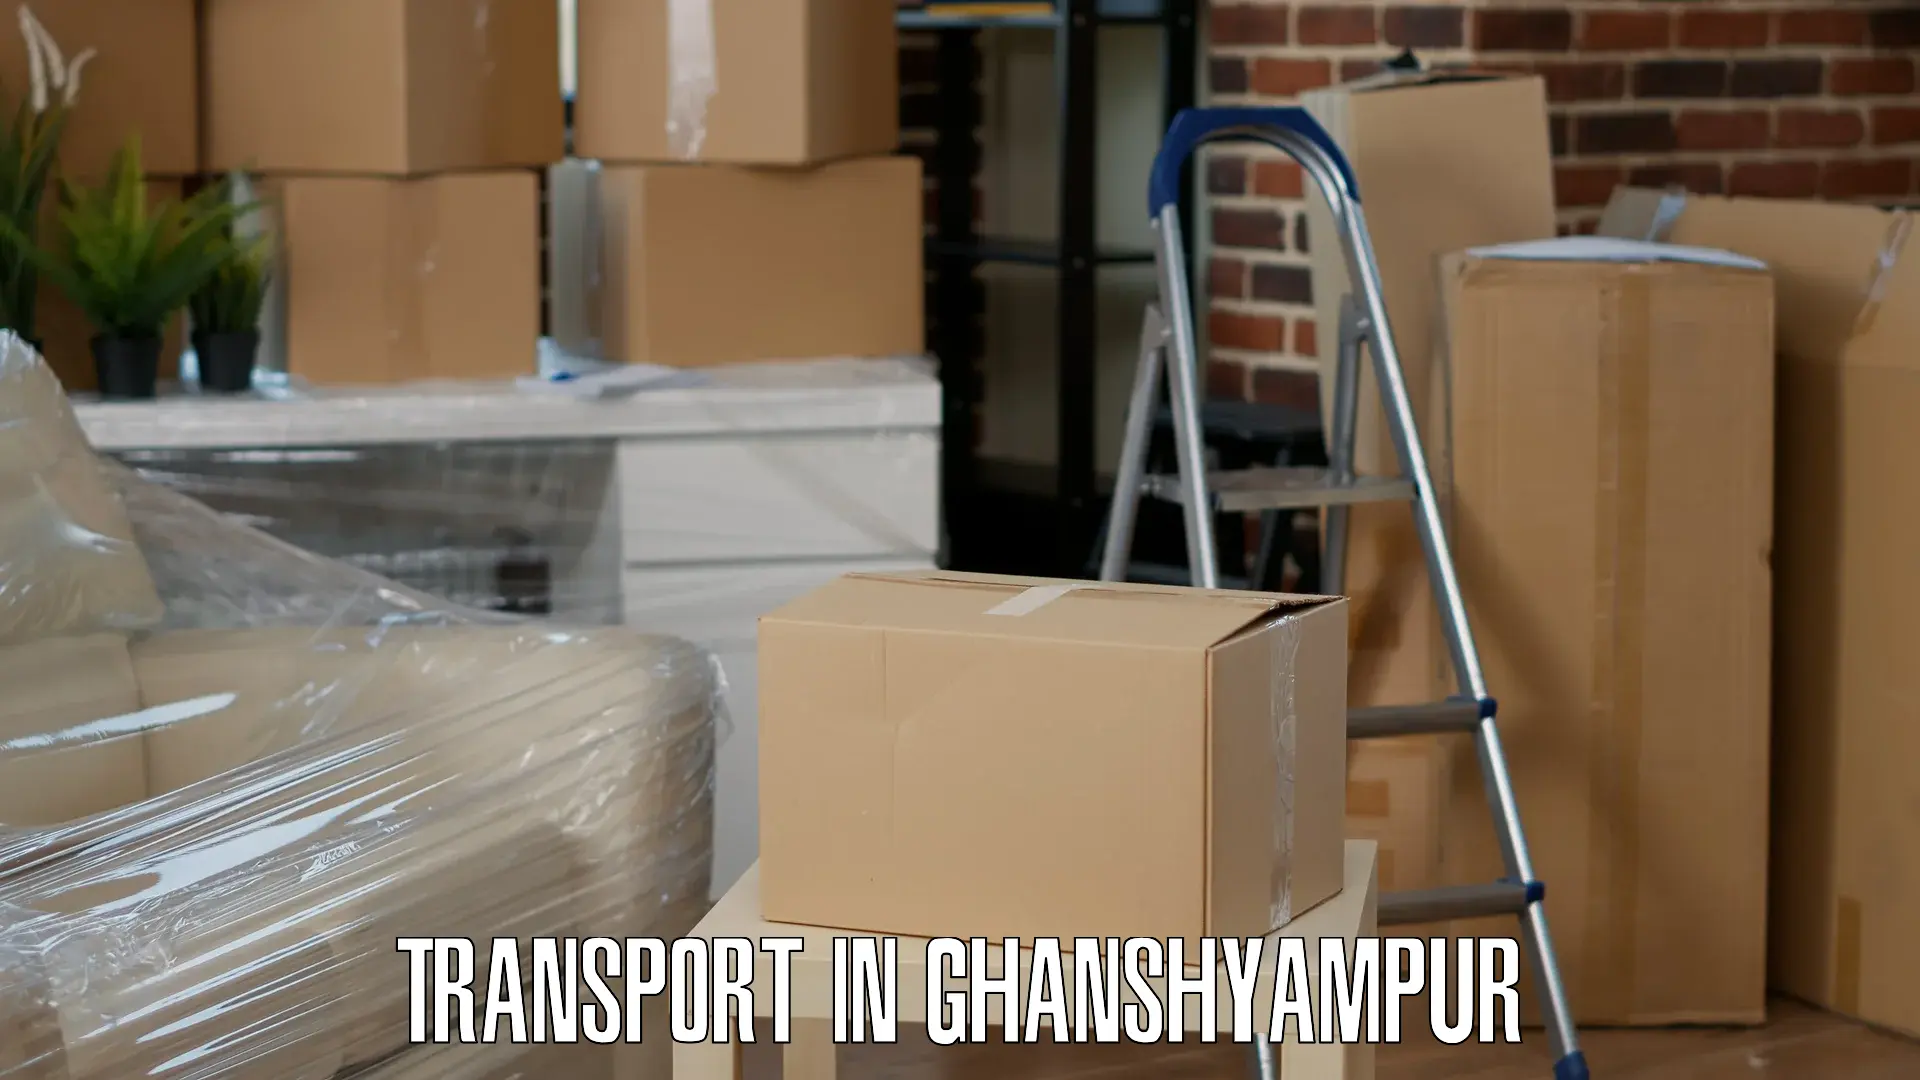 Daily transport service in Ghanshyampur